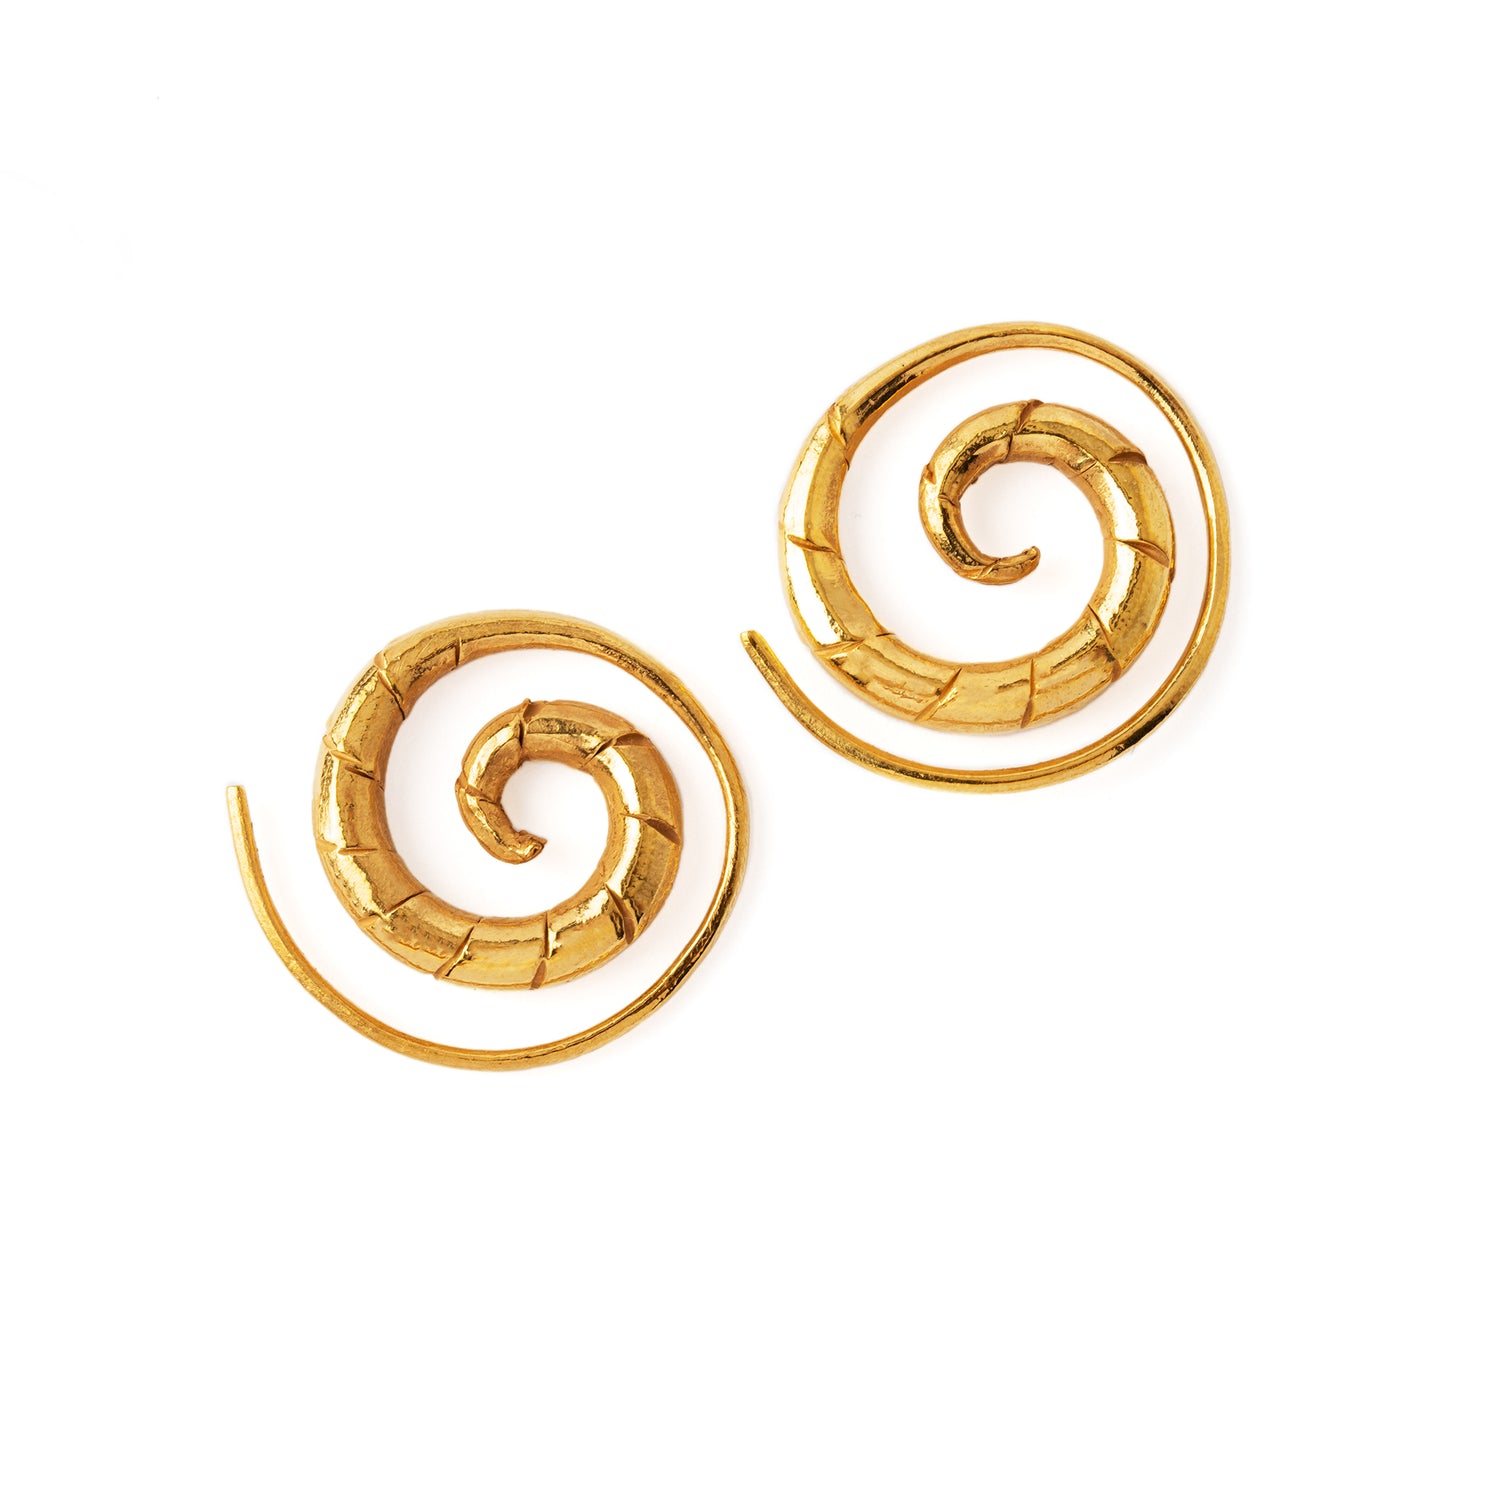 Gold Spiral Swirl Earrings frontal view